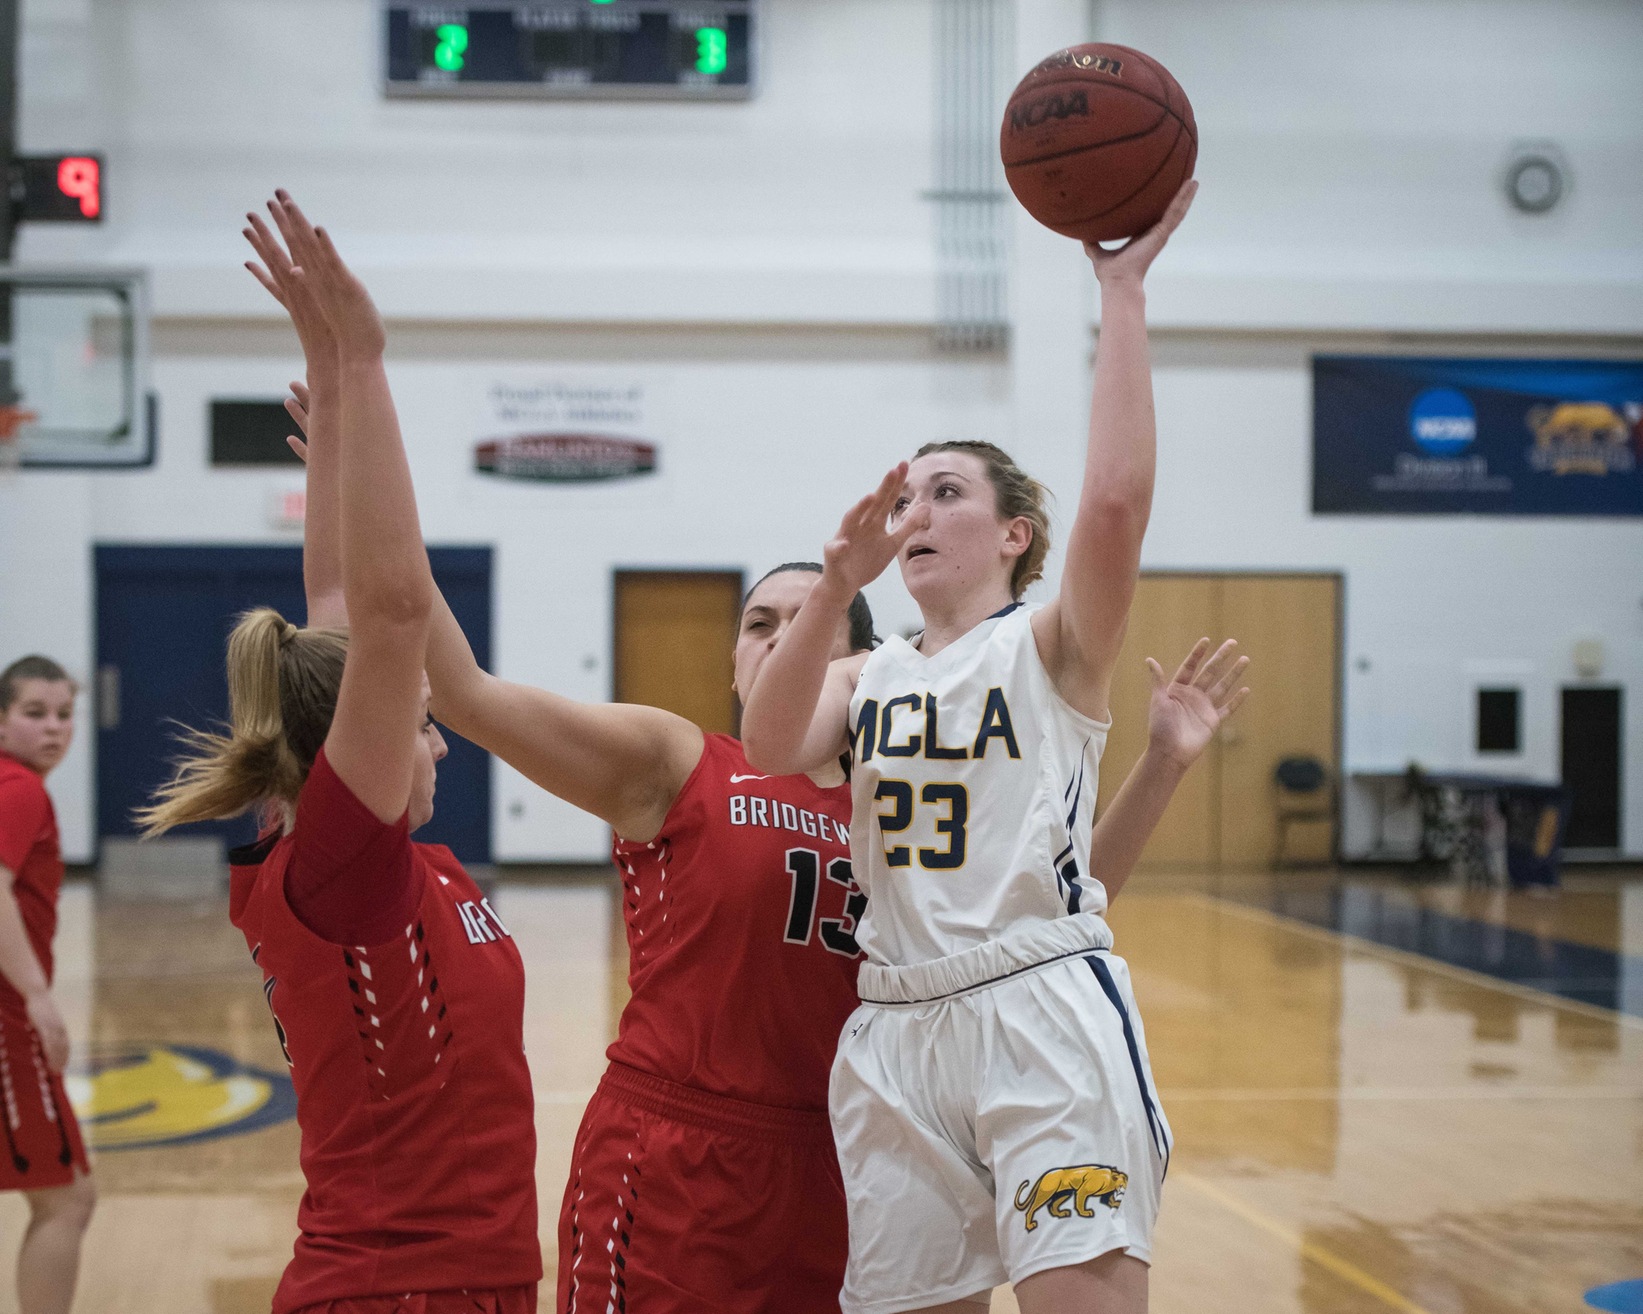 Women's Basketball comeback falls just short in 55-53 loss to Curry